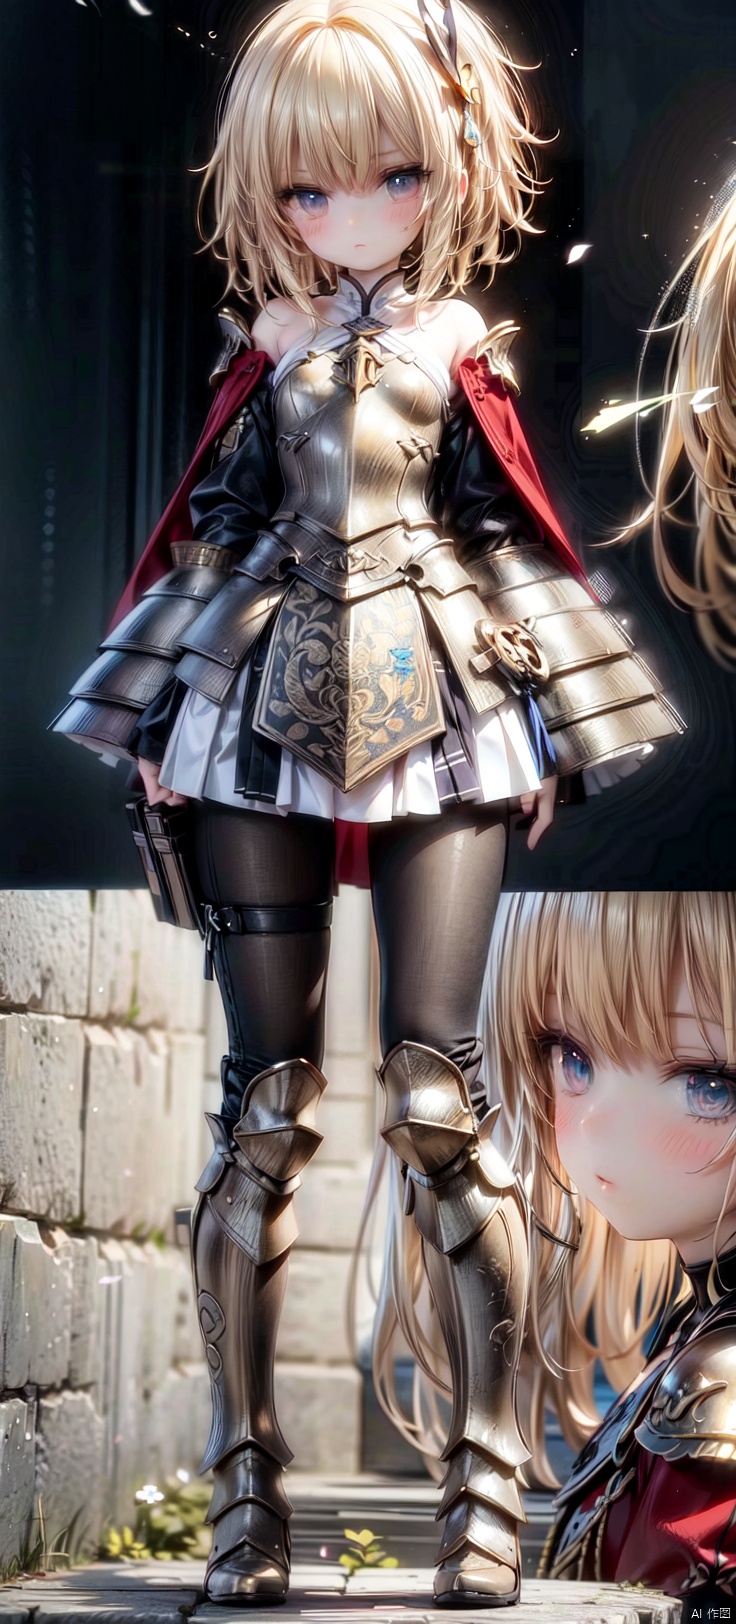  1 little girl, cute, Petite, loli,flat chested, blonde_long _hair, mantle(blonde stamp), perfect elegant face, perfect eyes,(SLE, mksks style, detailed background, ATD essence), excellent, best aesthetics, latest, best quality, masterpiece, very detailed, very detailed CG super detail, 8k_ wallpaper, illustrations, fine details), (rainbow scales armour): vivid,(science fiction), (extremely intricate), the most beautiful artwork in the world, professional digital art by Ed Blinkey and Atey Ghailan and Jeremy Mann and Greg Rutkowski,,,Glowing Tight armor(blonde print), metal long sleeves (blonde scalelike), metal boots (blonde scalelike), (blonde) metal armour (scalelike),Metal arm armor(blonde scalelike),Metal shoulder armor(blonde scalelike),A floating cloak,heavy breathing,after sex,